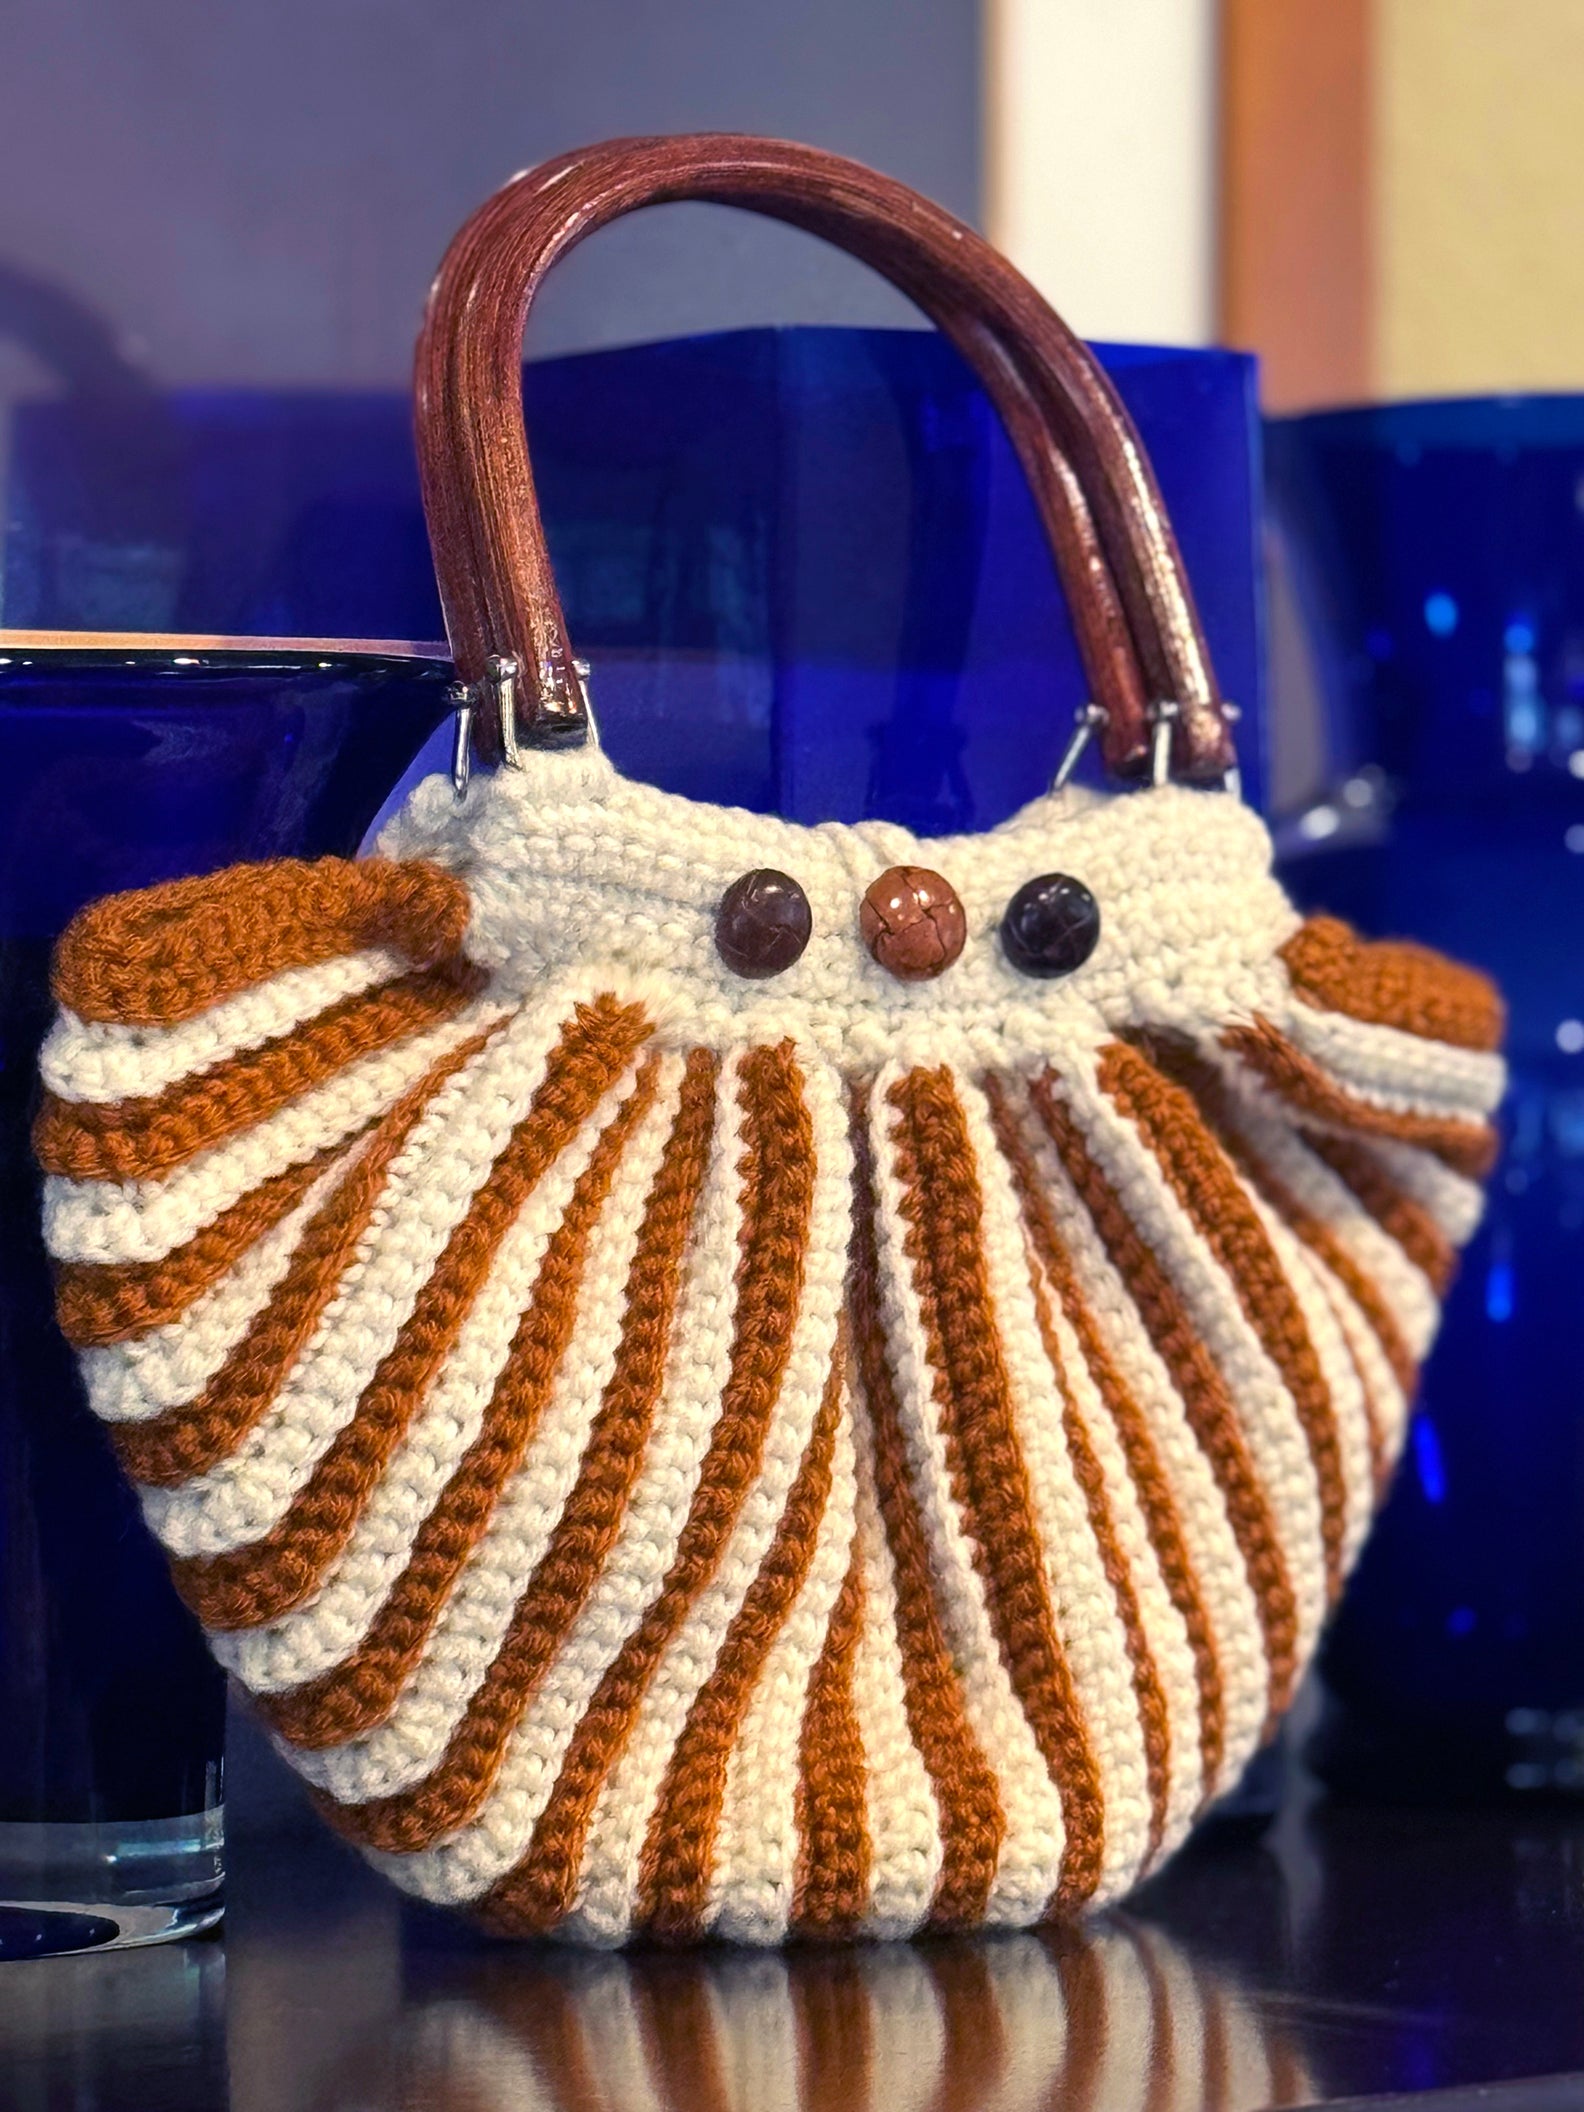 Venetian style, one-of-a-kind vintage crocheted bag by Oda G. Handcrafted with upcycled acrylic yarn in cream & cinnamon stripe pattern, vintage wood handles and buttons (on both sides) in complimenting brown tones. Dimensions: Length: 12"(longest part) Height: 9" (with 5"handles 14") Width: 4" Handwash cold, Dry flat, or Dry Clean Made in the USA